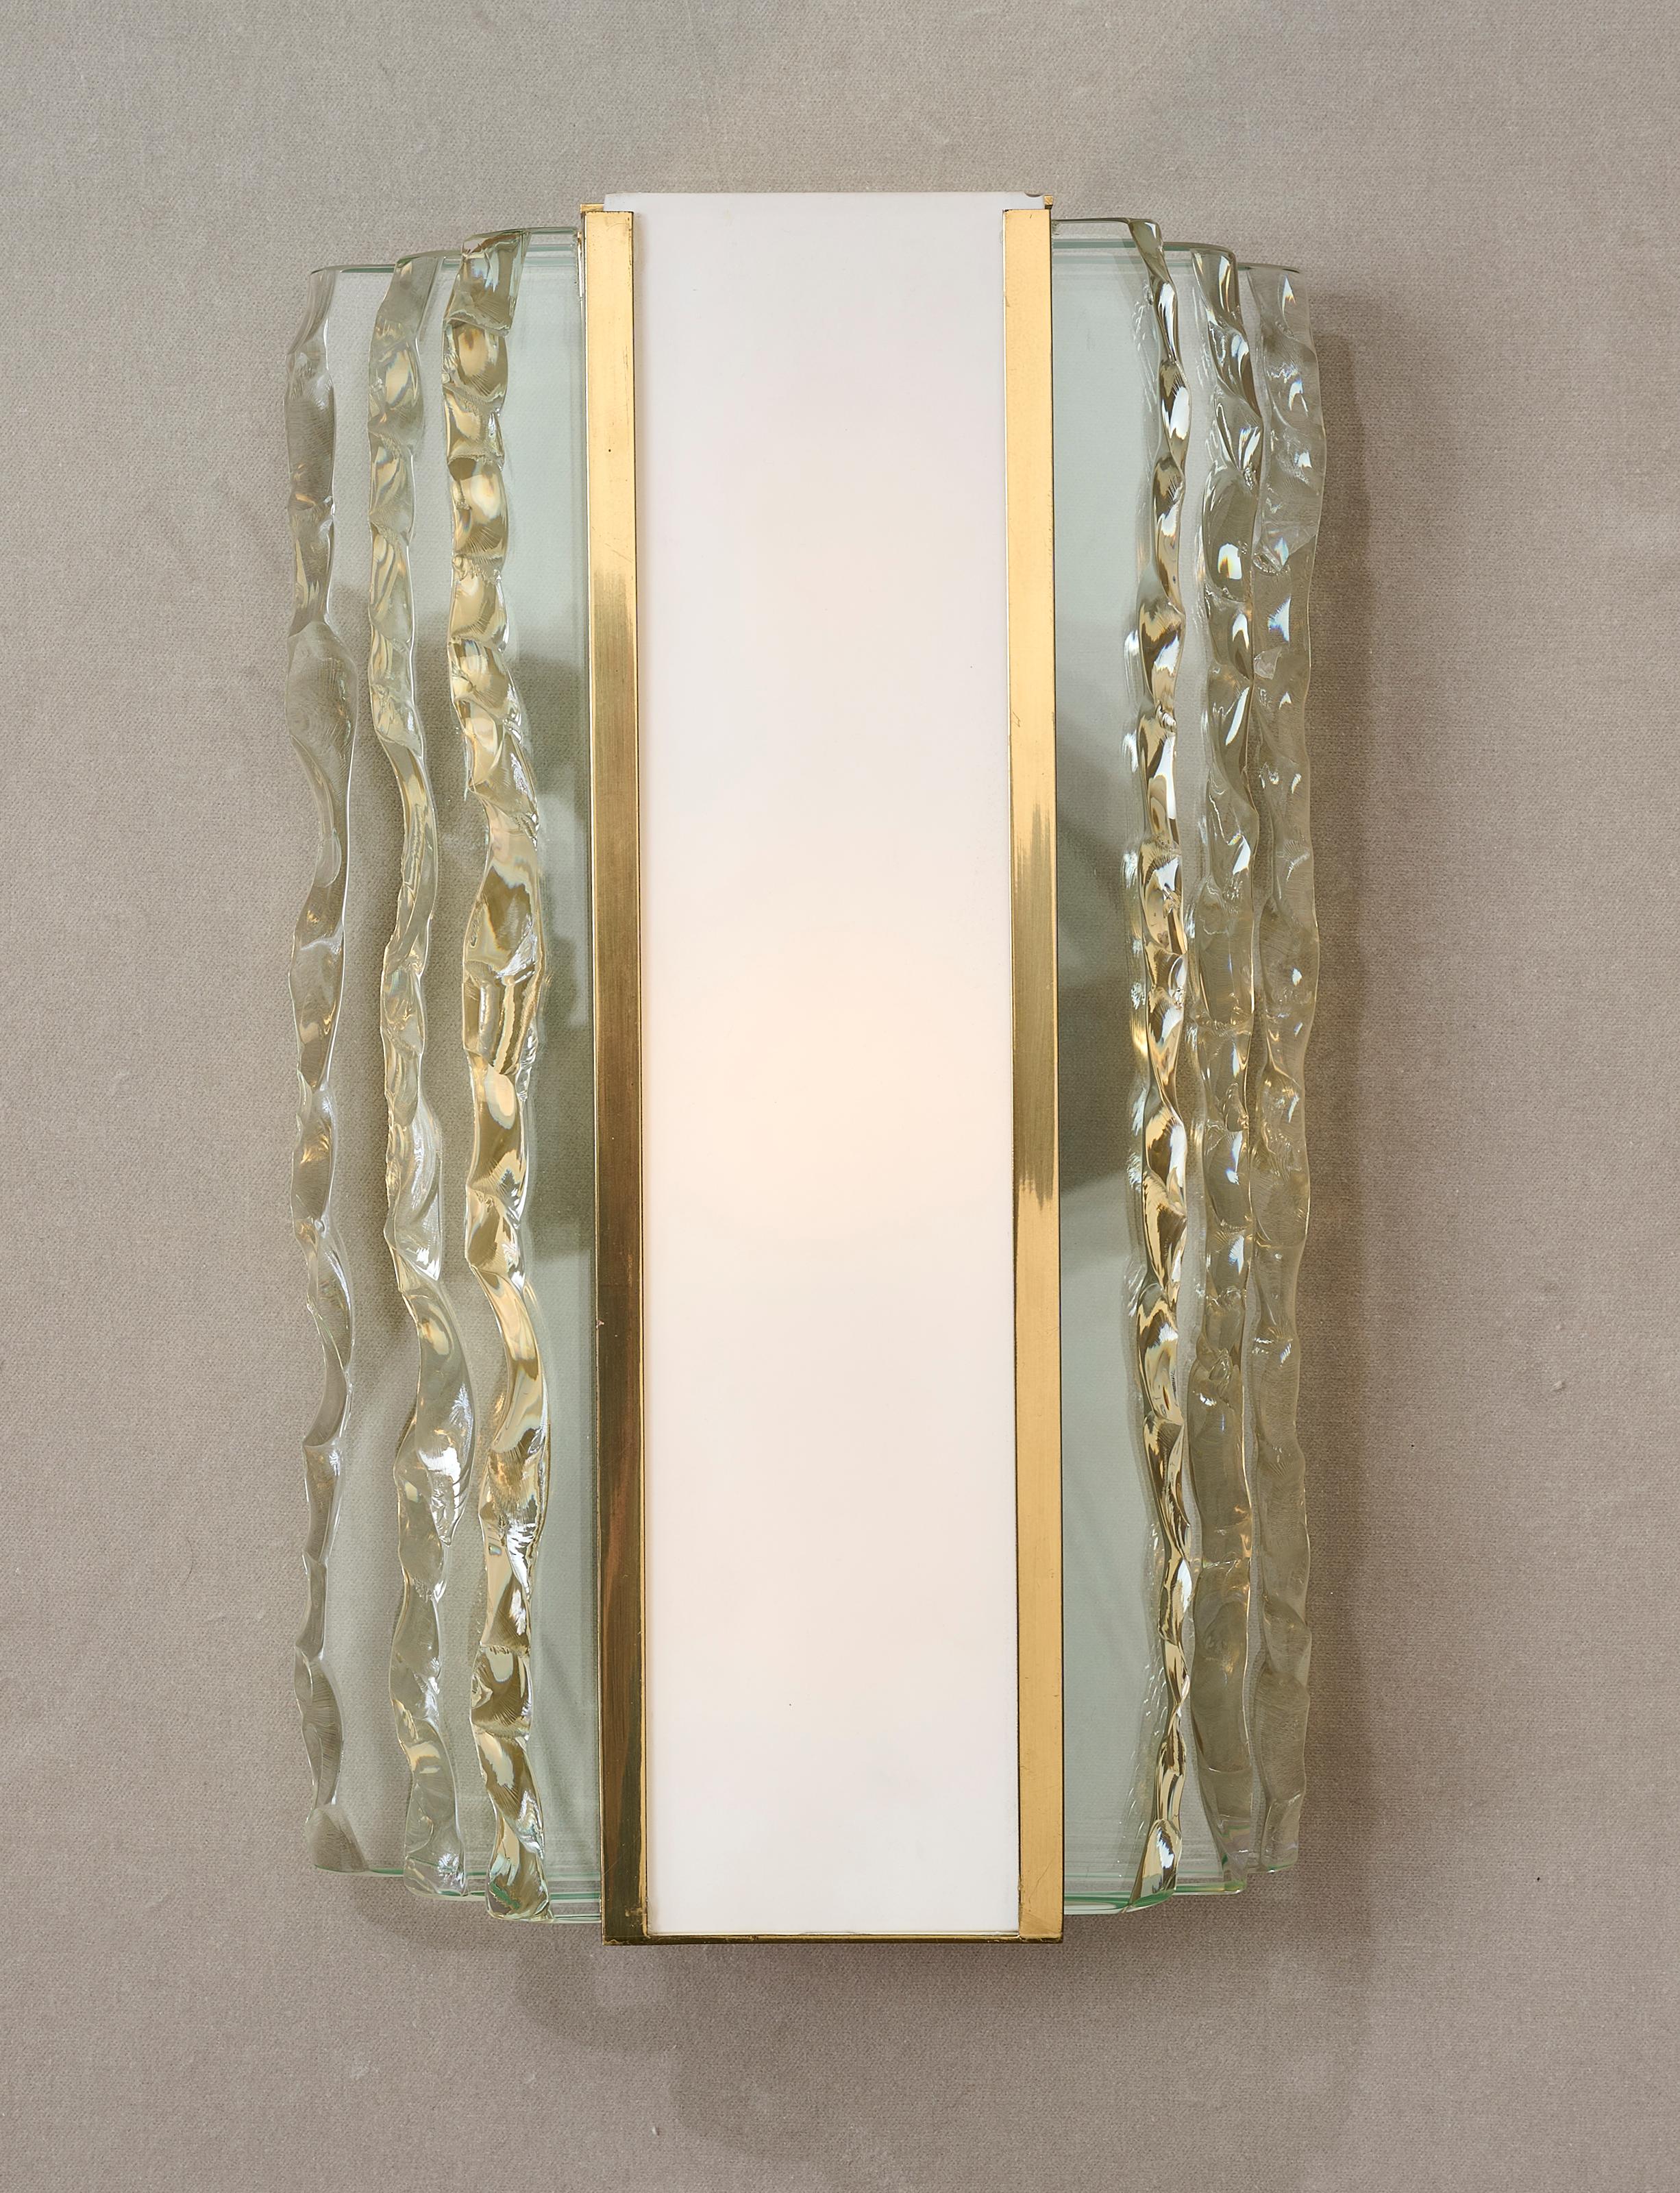 Max Ingrand for Fontana Arte: Pair of Cut Crystal and Brass Sconces, Italy 1954 For Sale 6